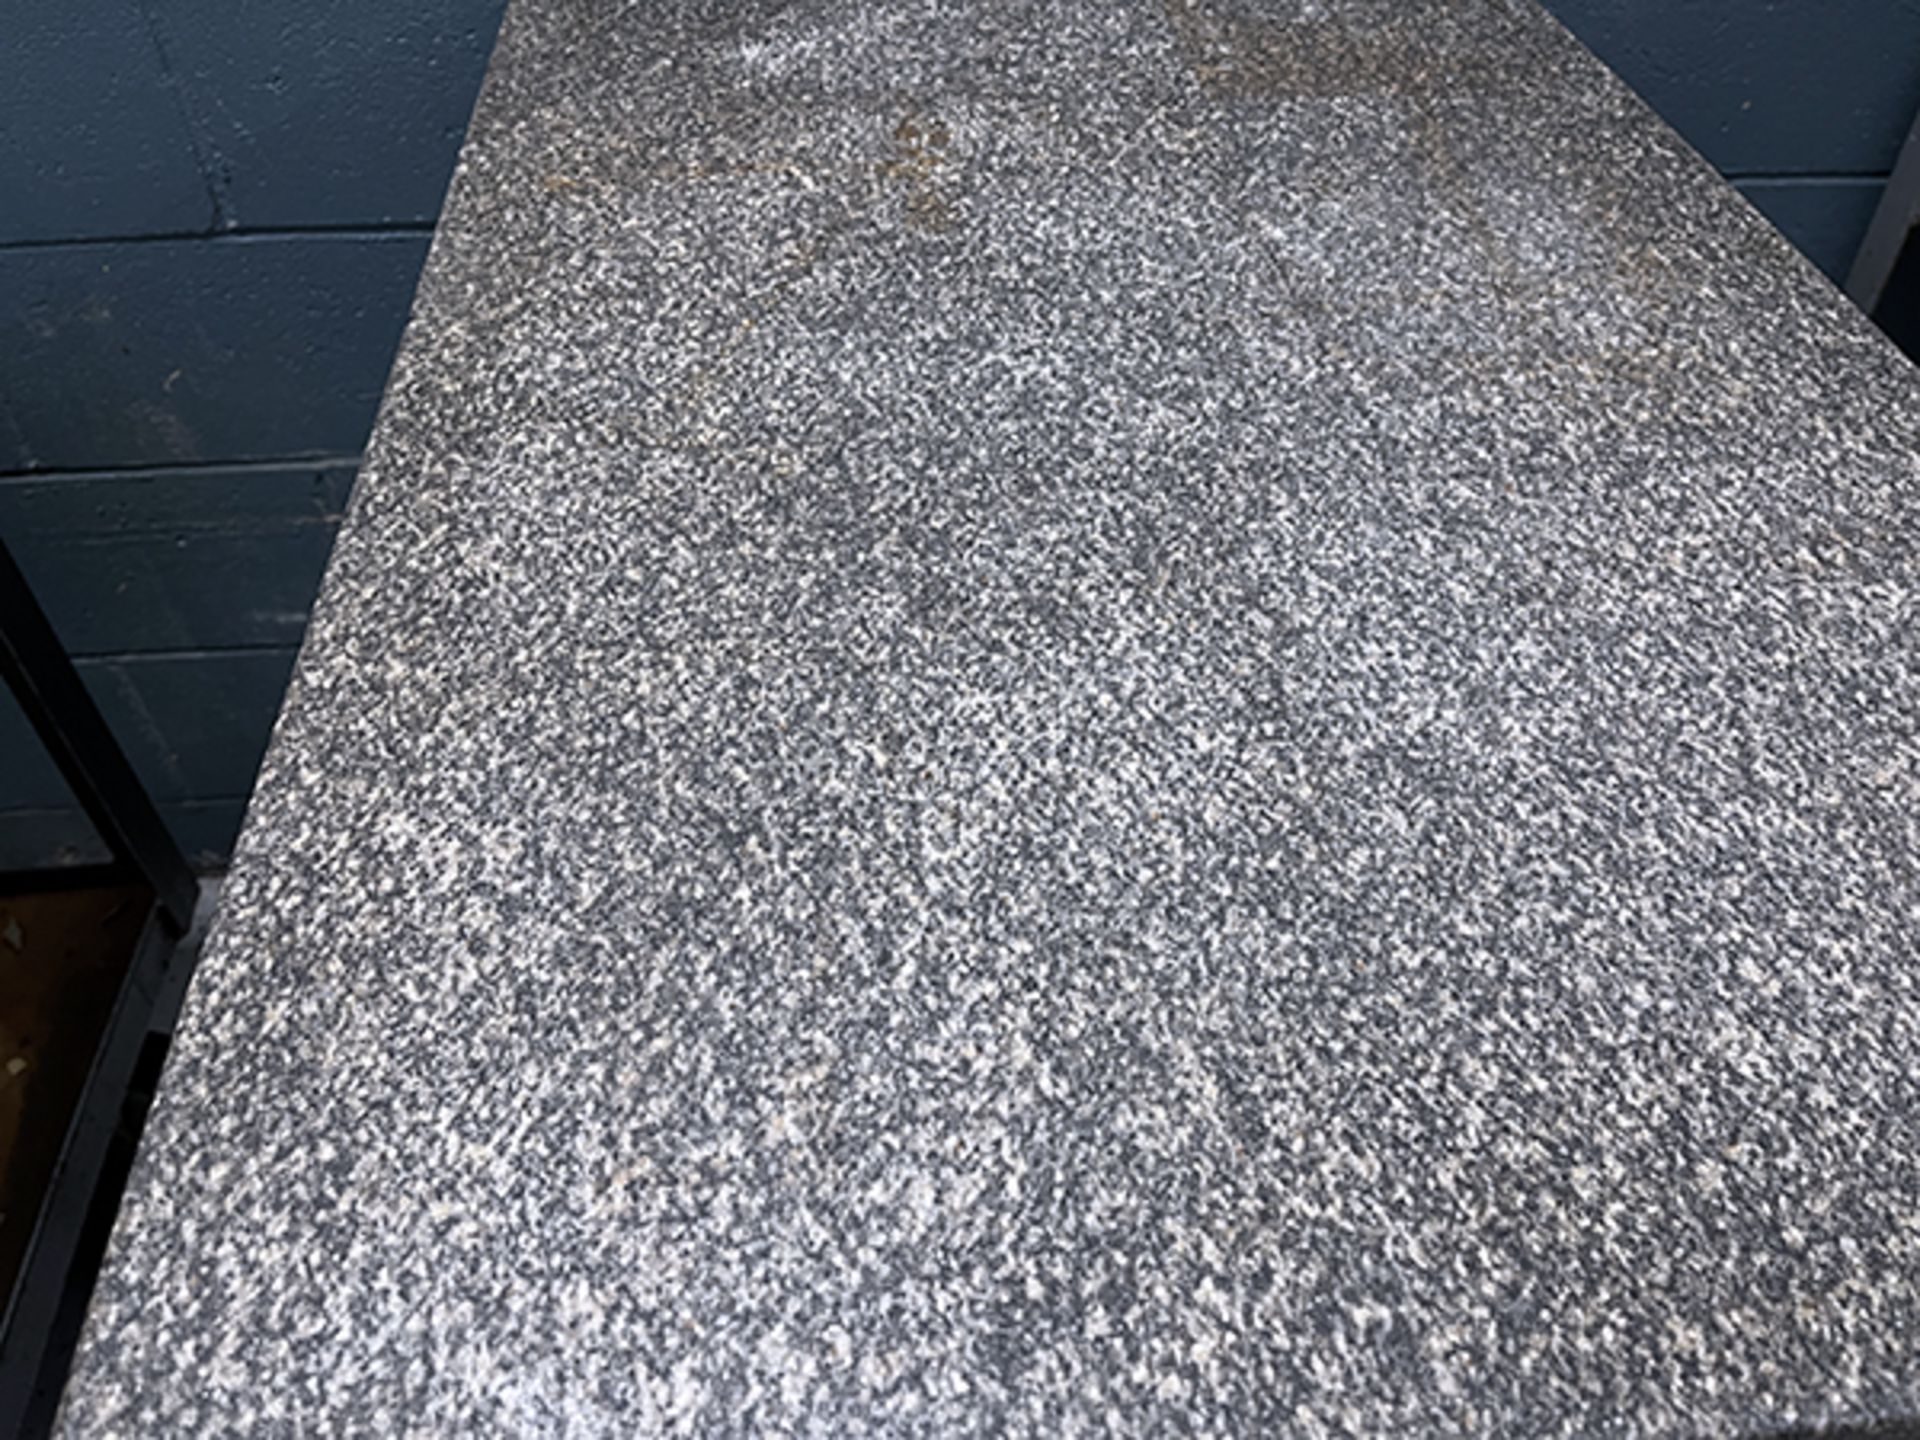 36" x 24" x 4" Granite Surface Plate - Image 3 of 5